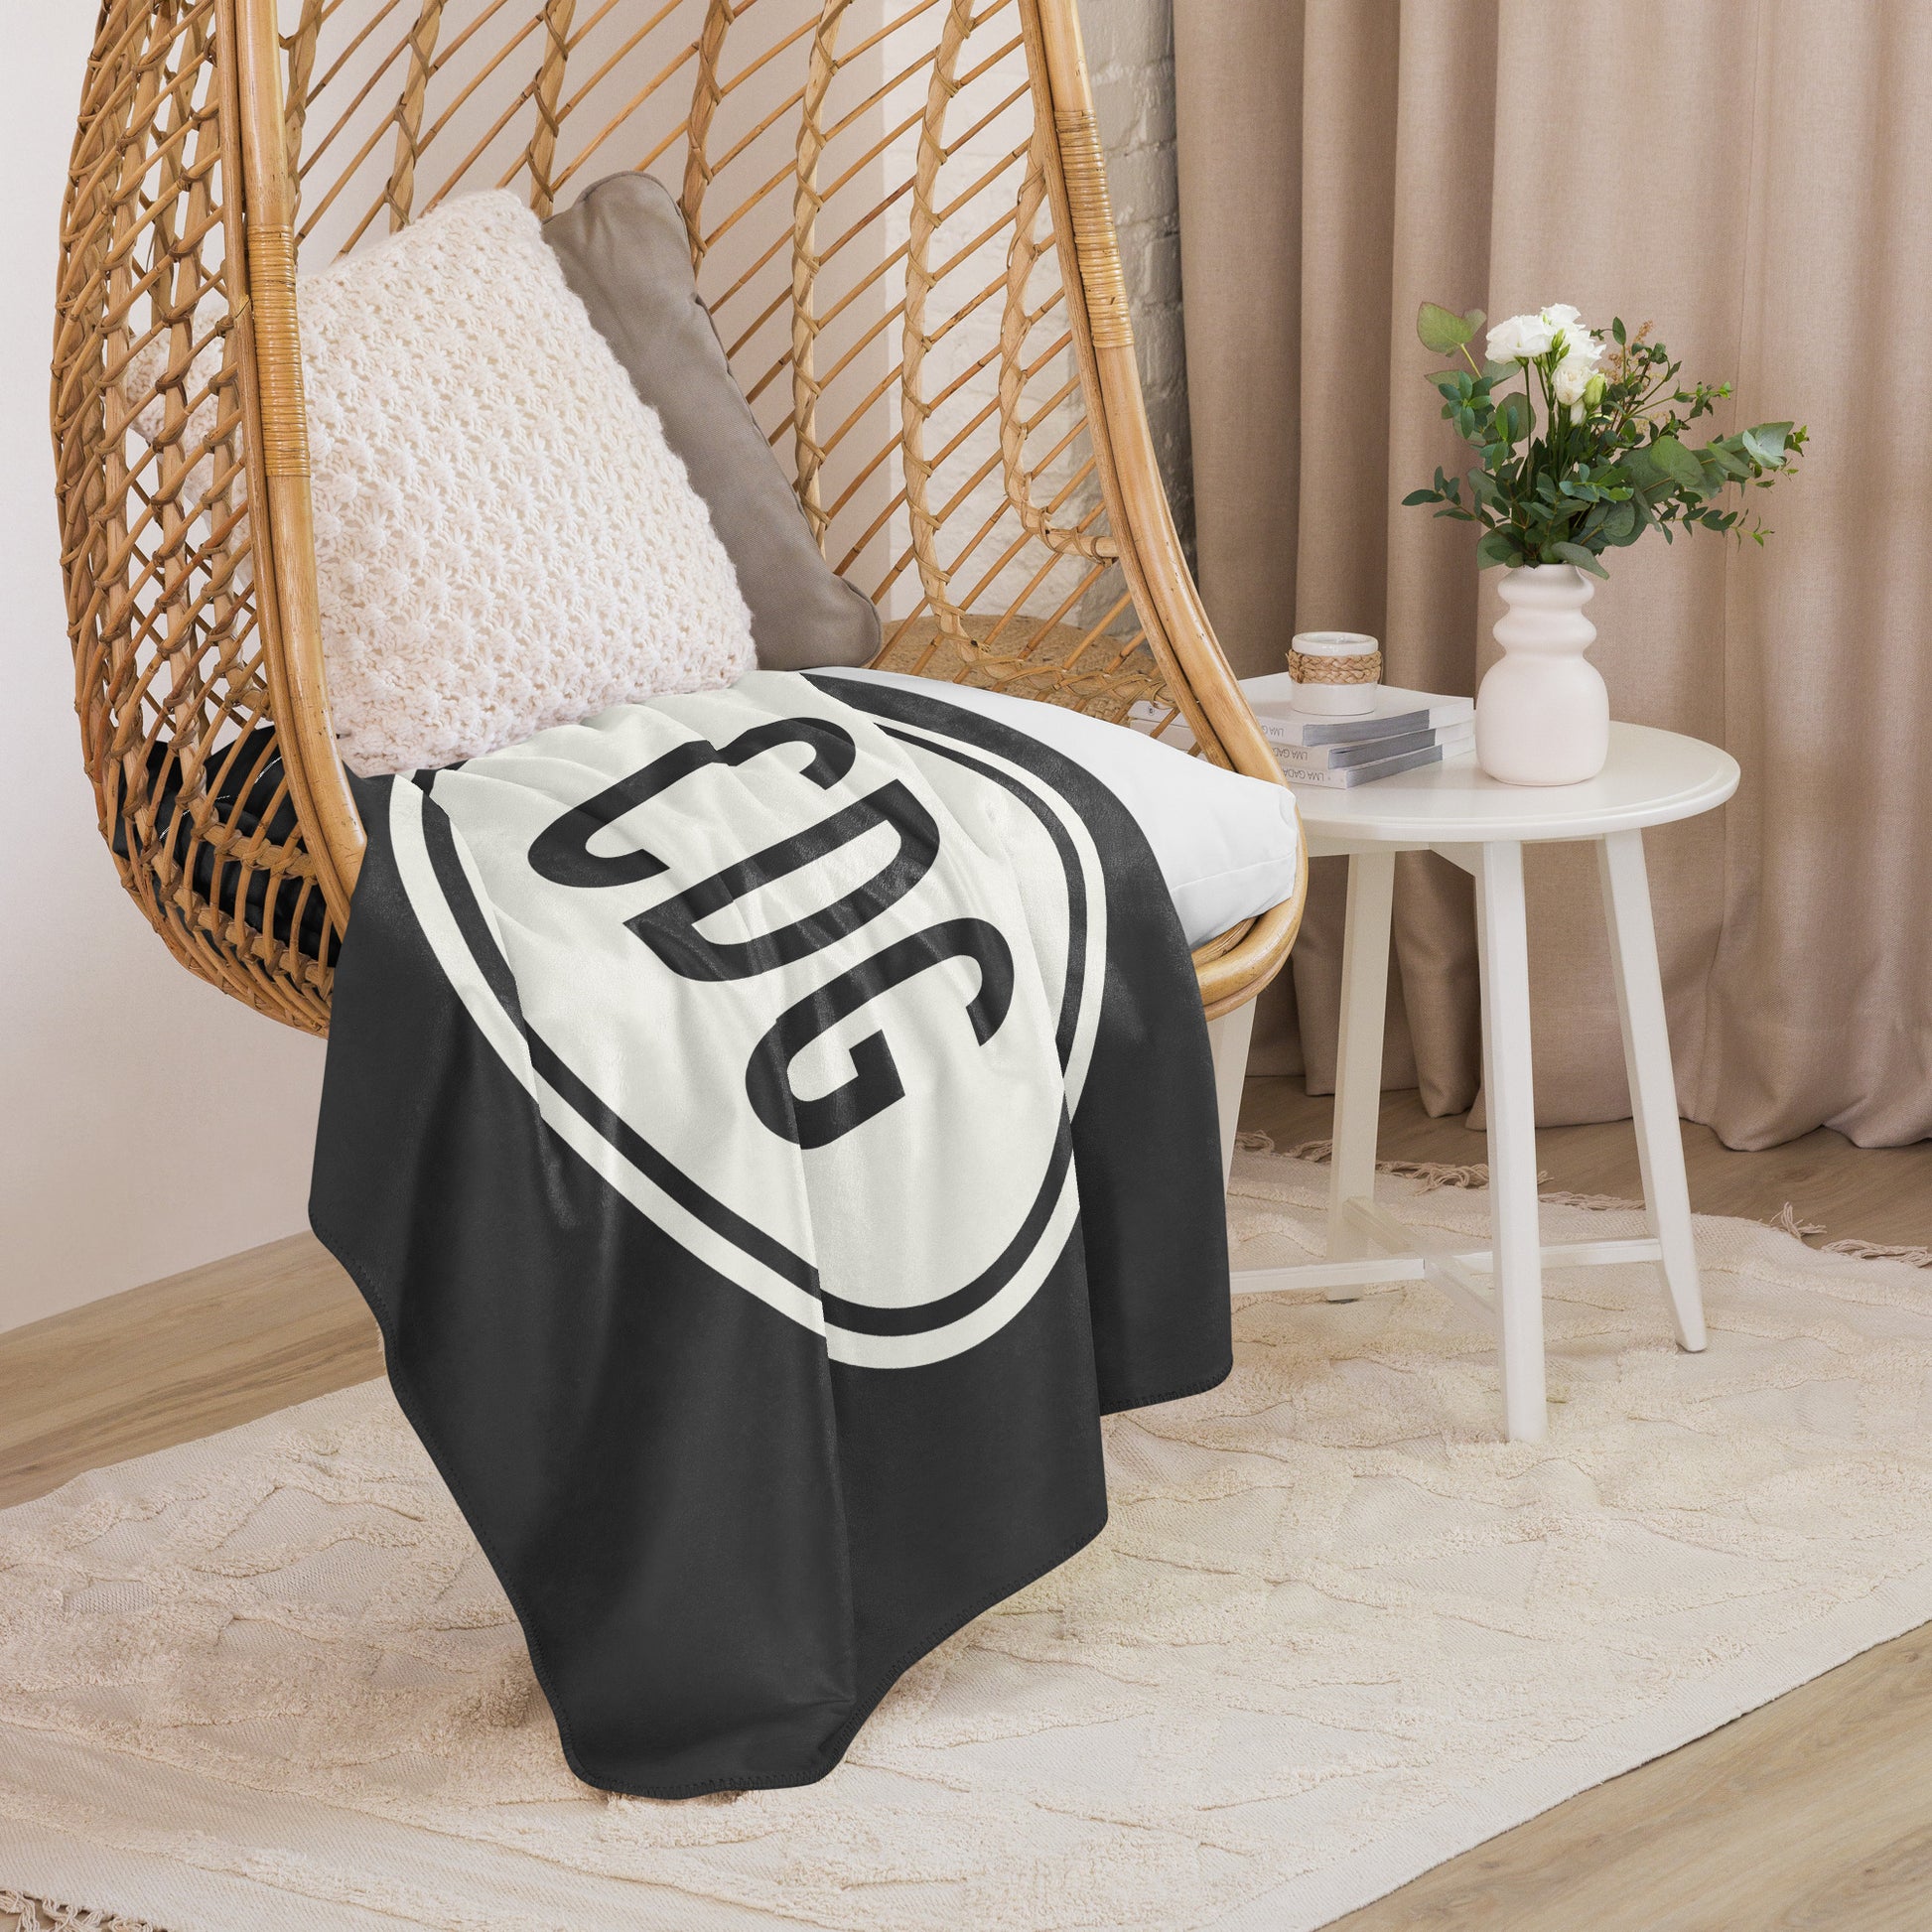 Unique Travel Gift Sherpa Blanket - White Oval • CDG Paris • YHM Designs - Image 06